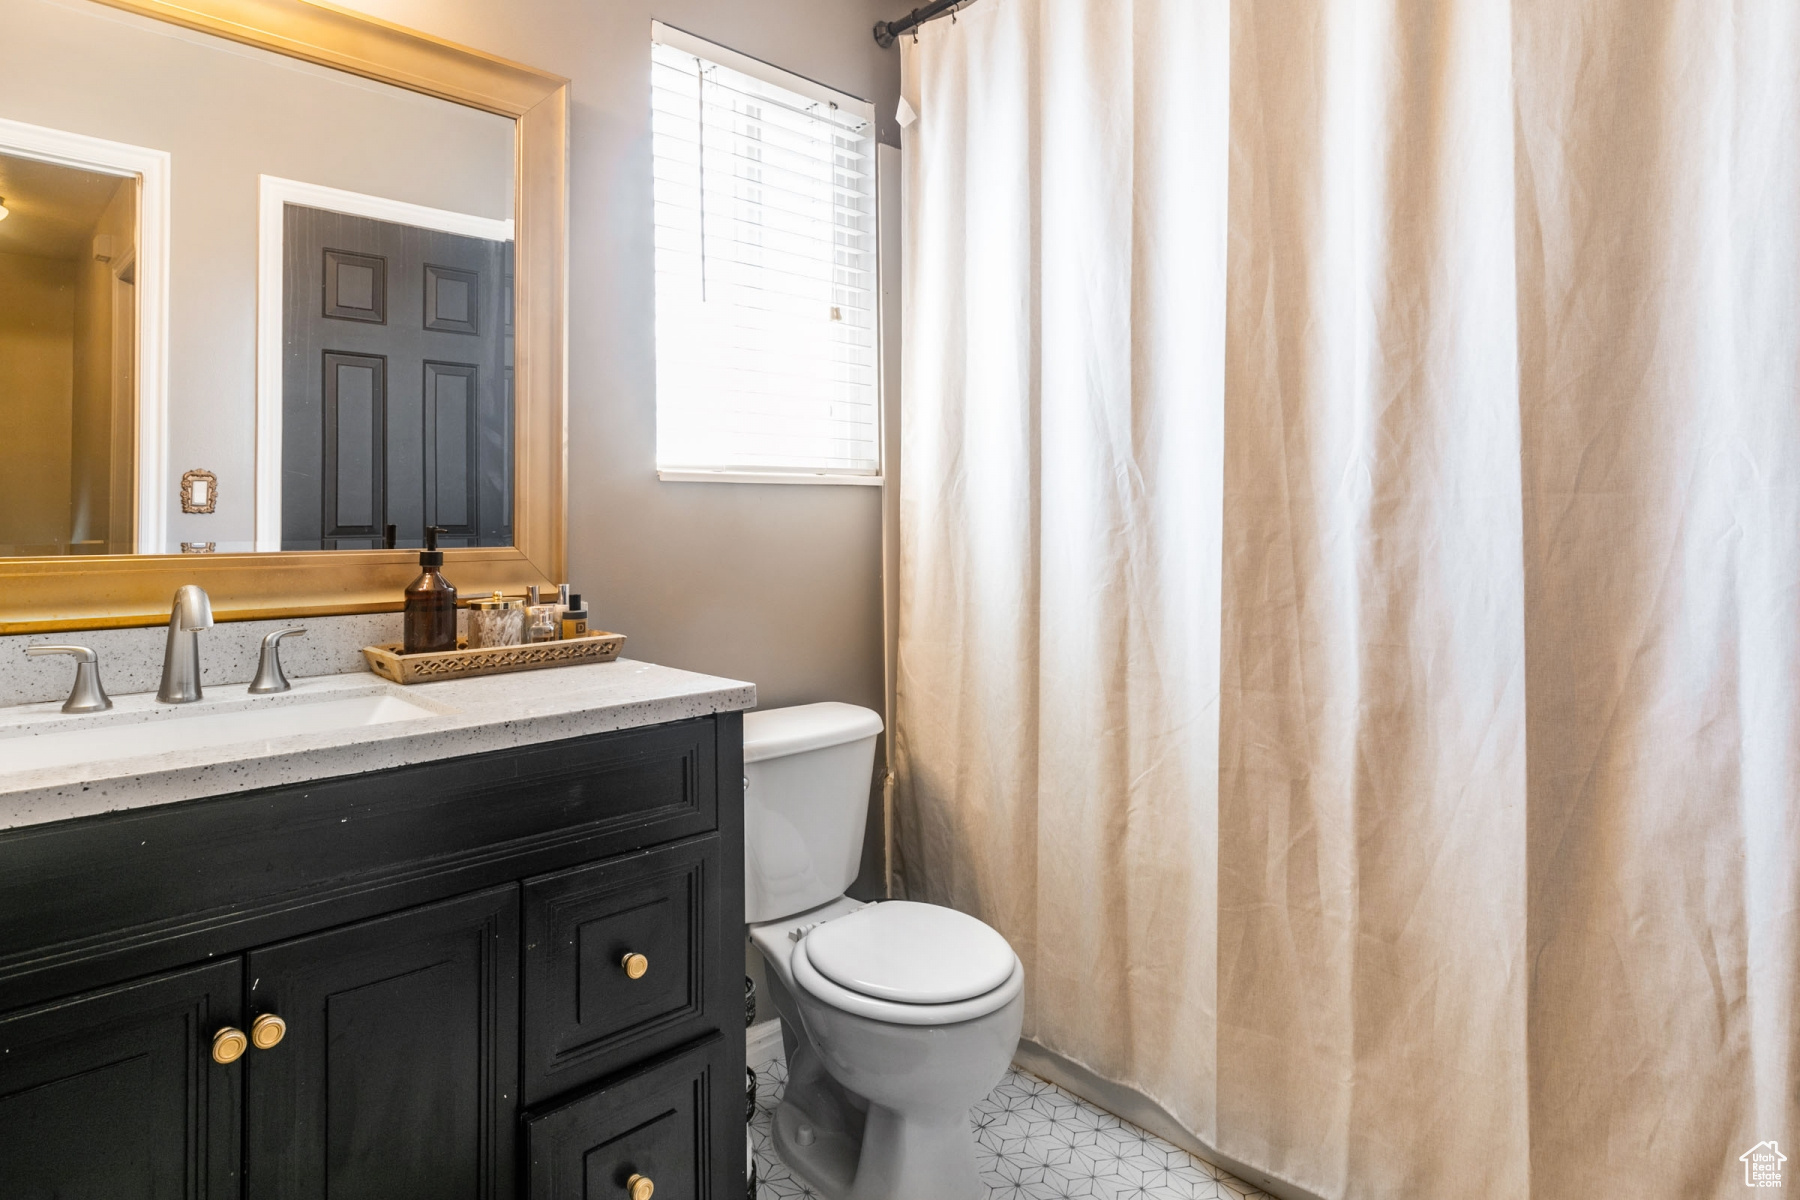 Bathroom with a healthy amount of sunlight, large vanity, tile floors, and toilet